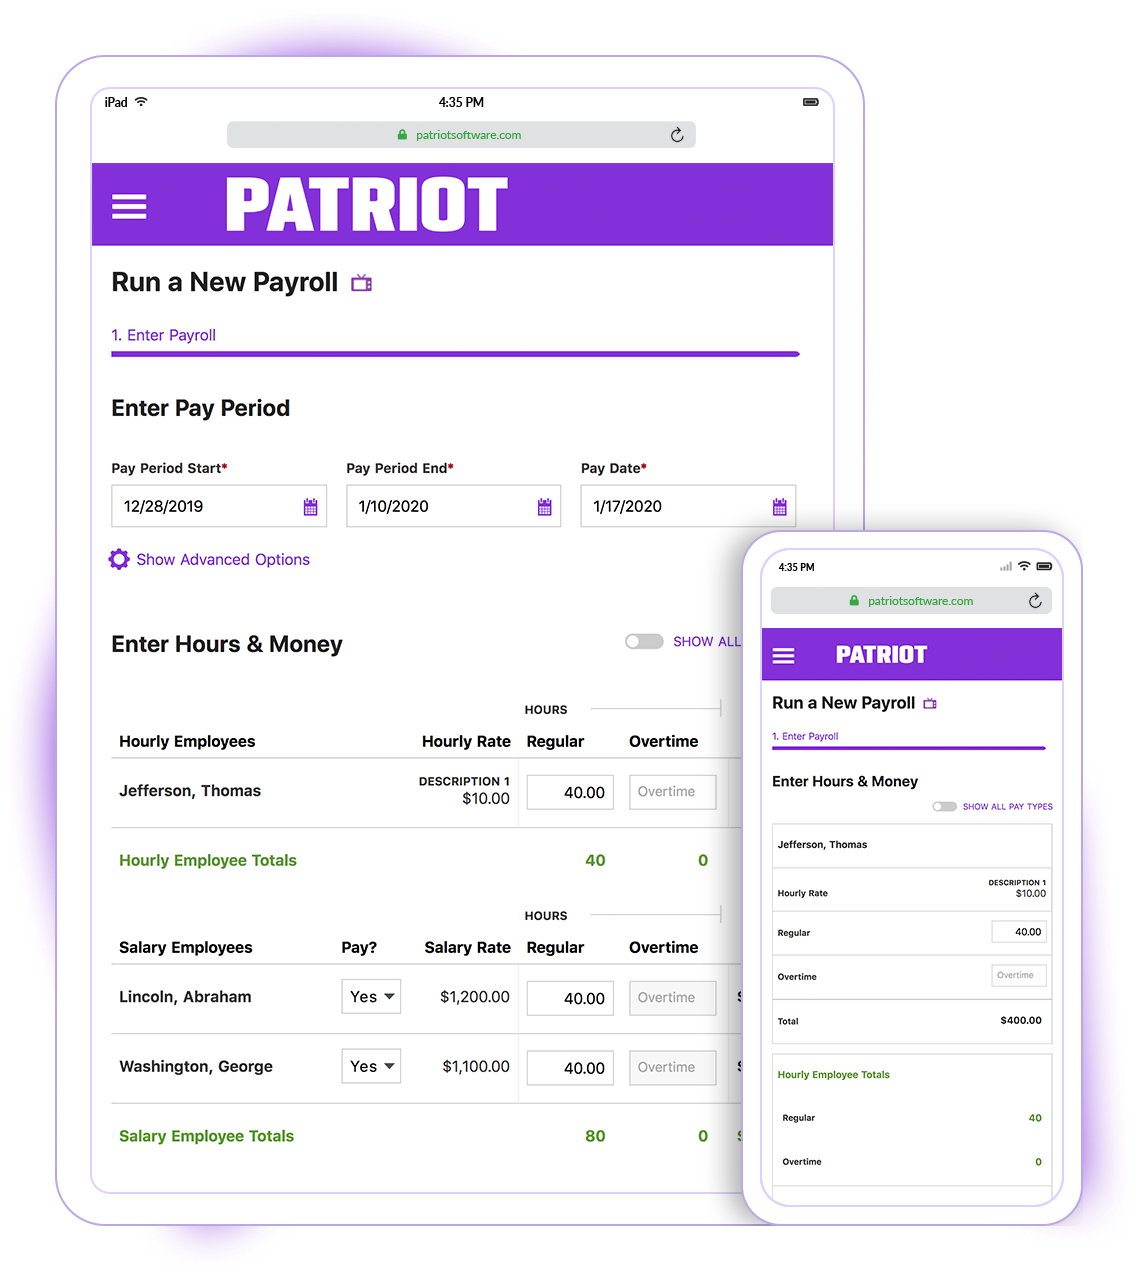 Patriot Payroll Software - Patriot Software has a responsive design so you can run payroll on any device with an internet or data connection.